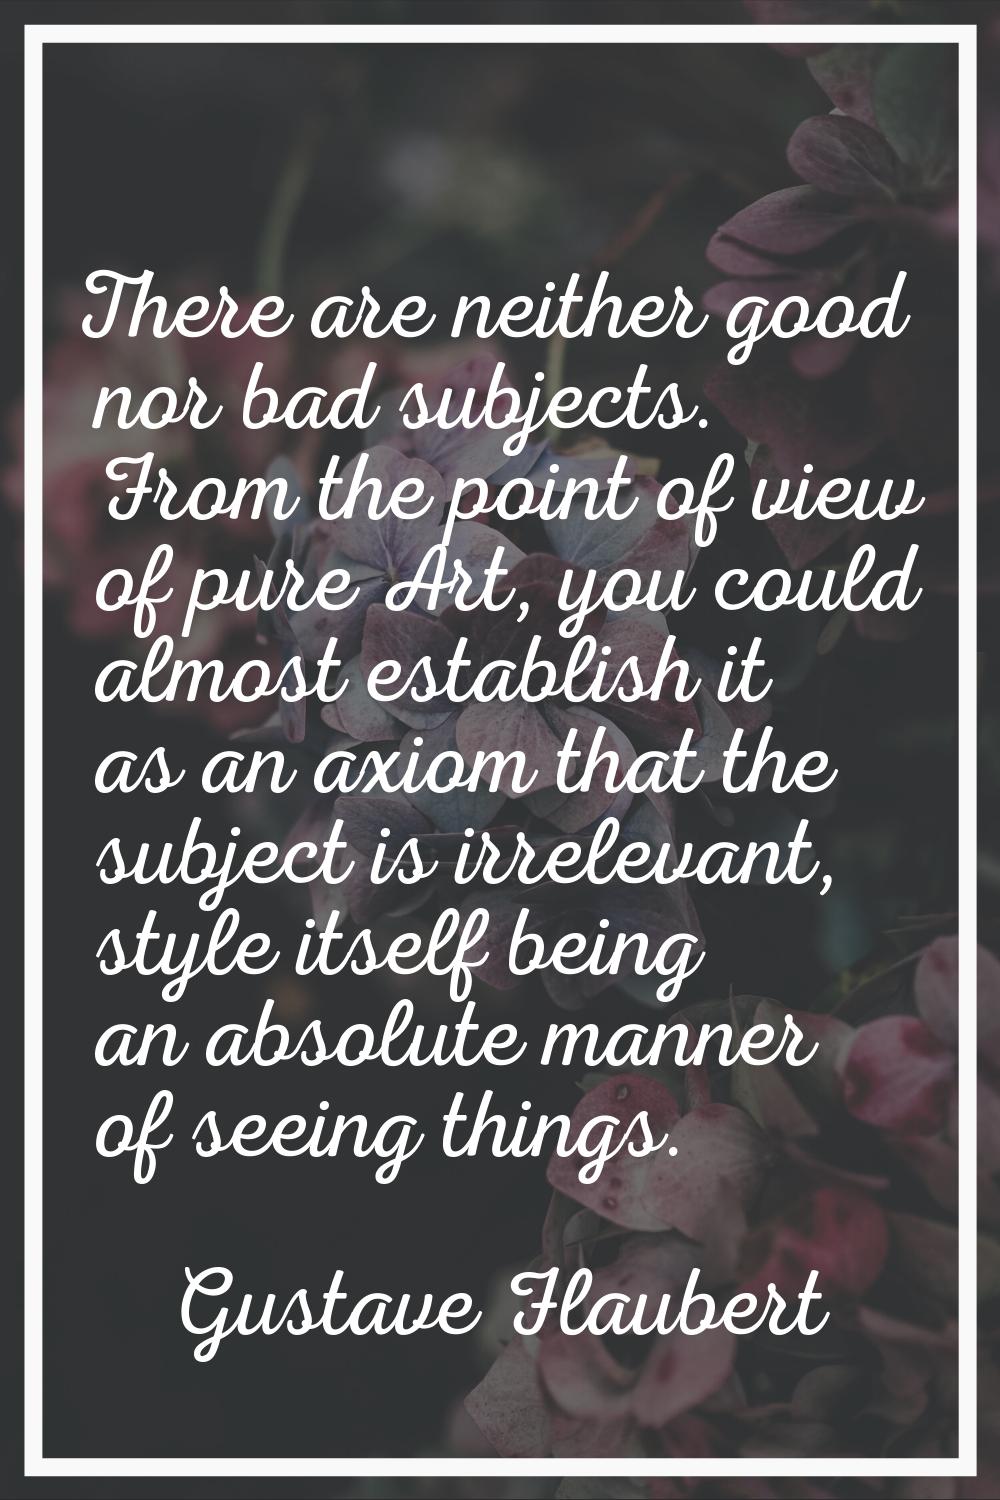 There are neither good nor bad subjects. From the point of view of pure Art, you could almost estab